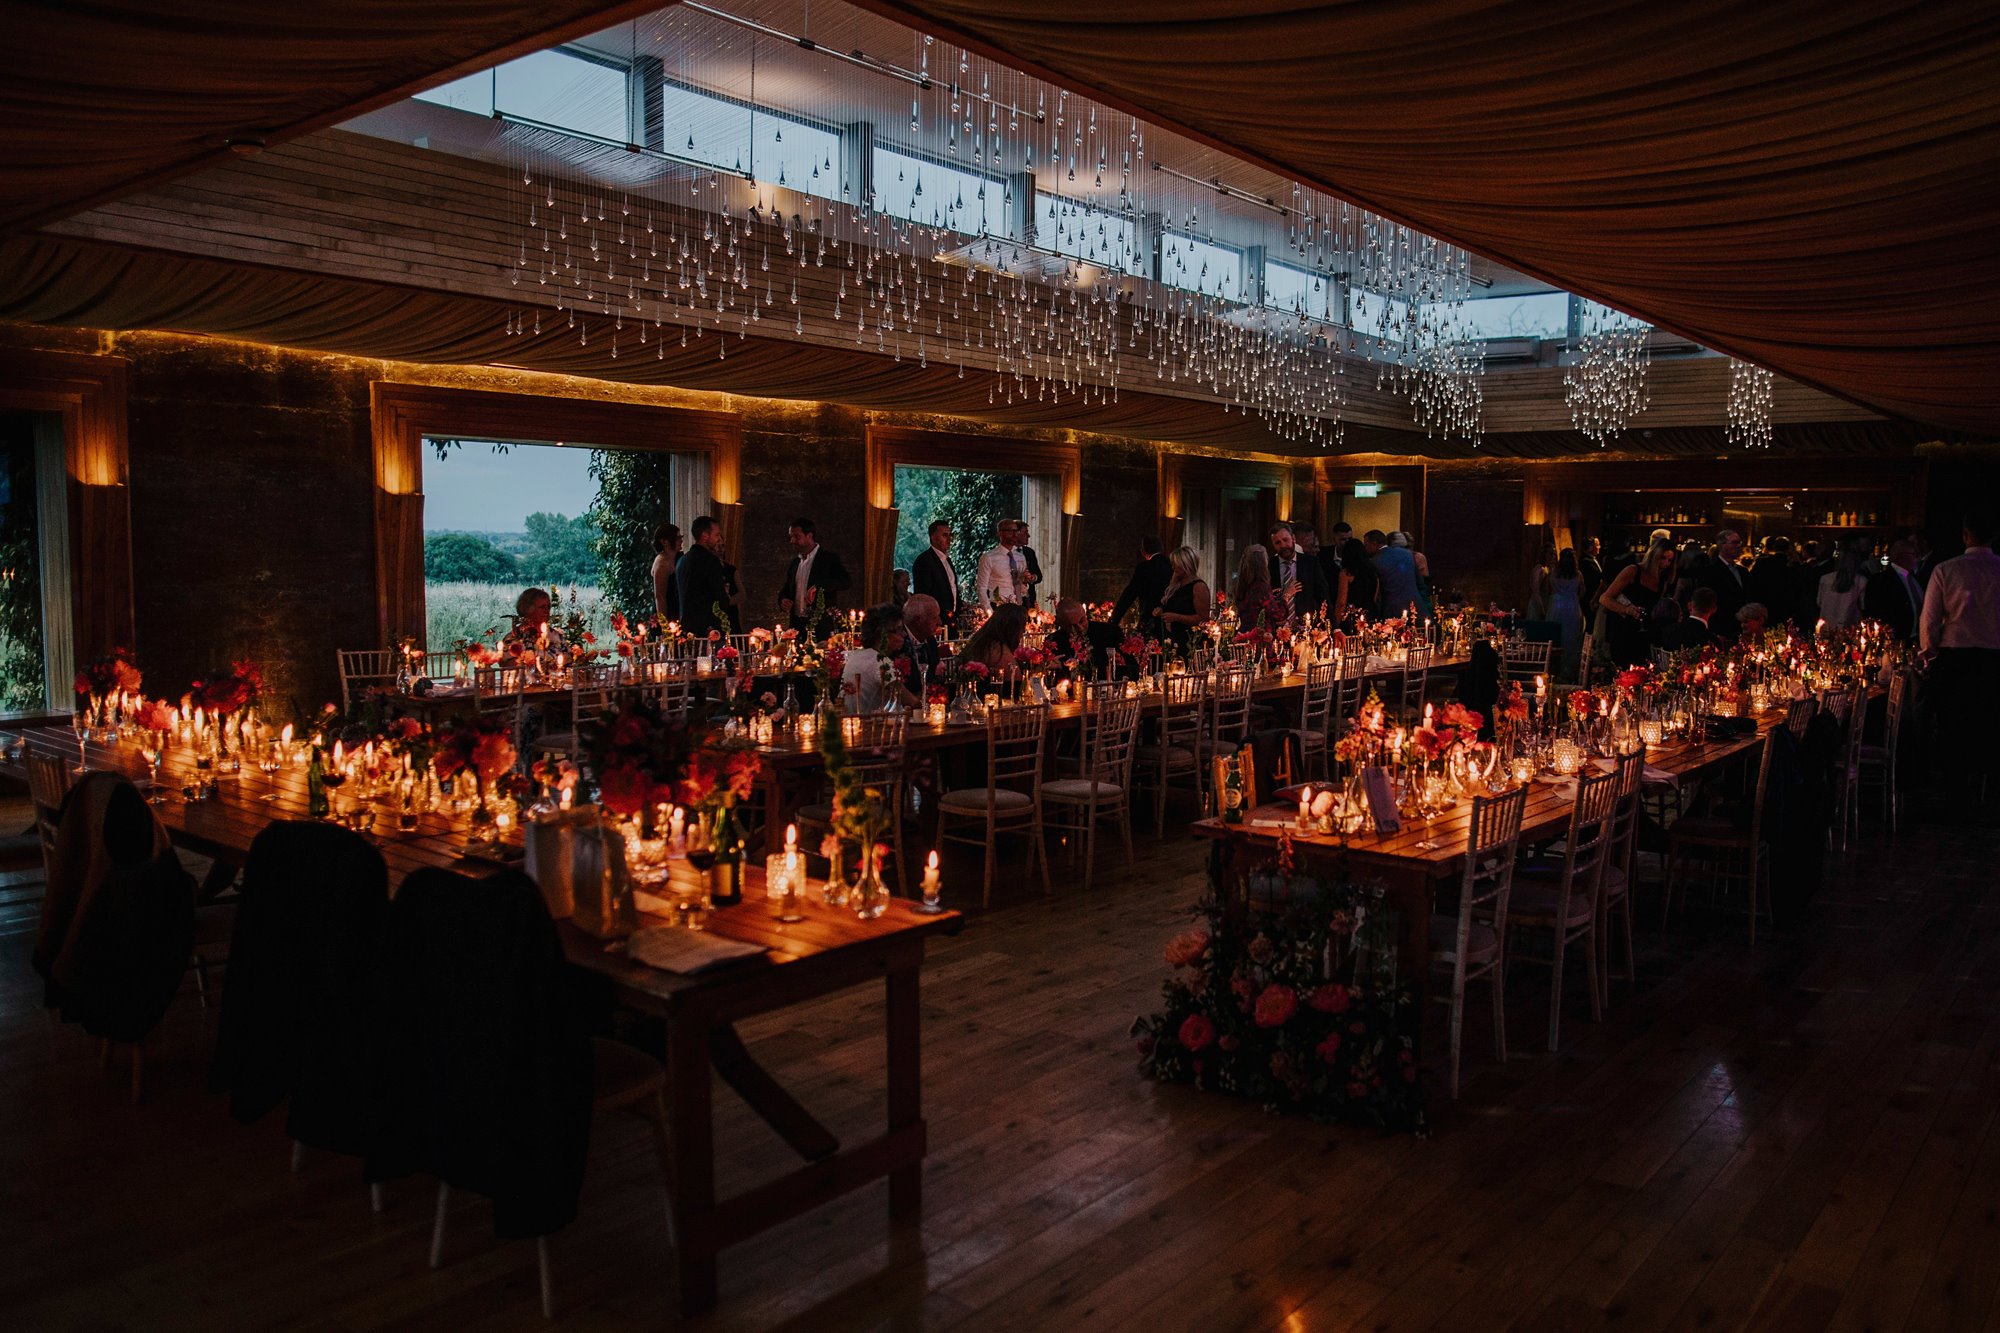 Guests enjoying a wedding reception in a candle lit Gillyflower at Elmore Court, with tables dressed in pink flowers, candles and place settings